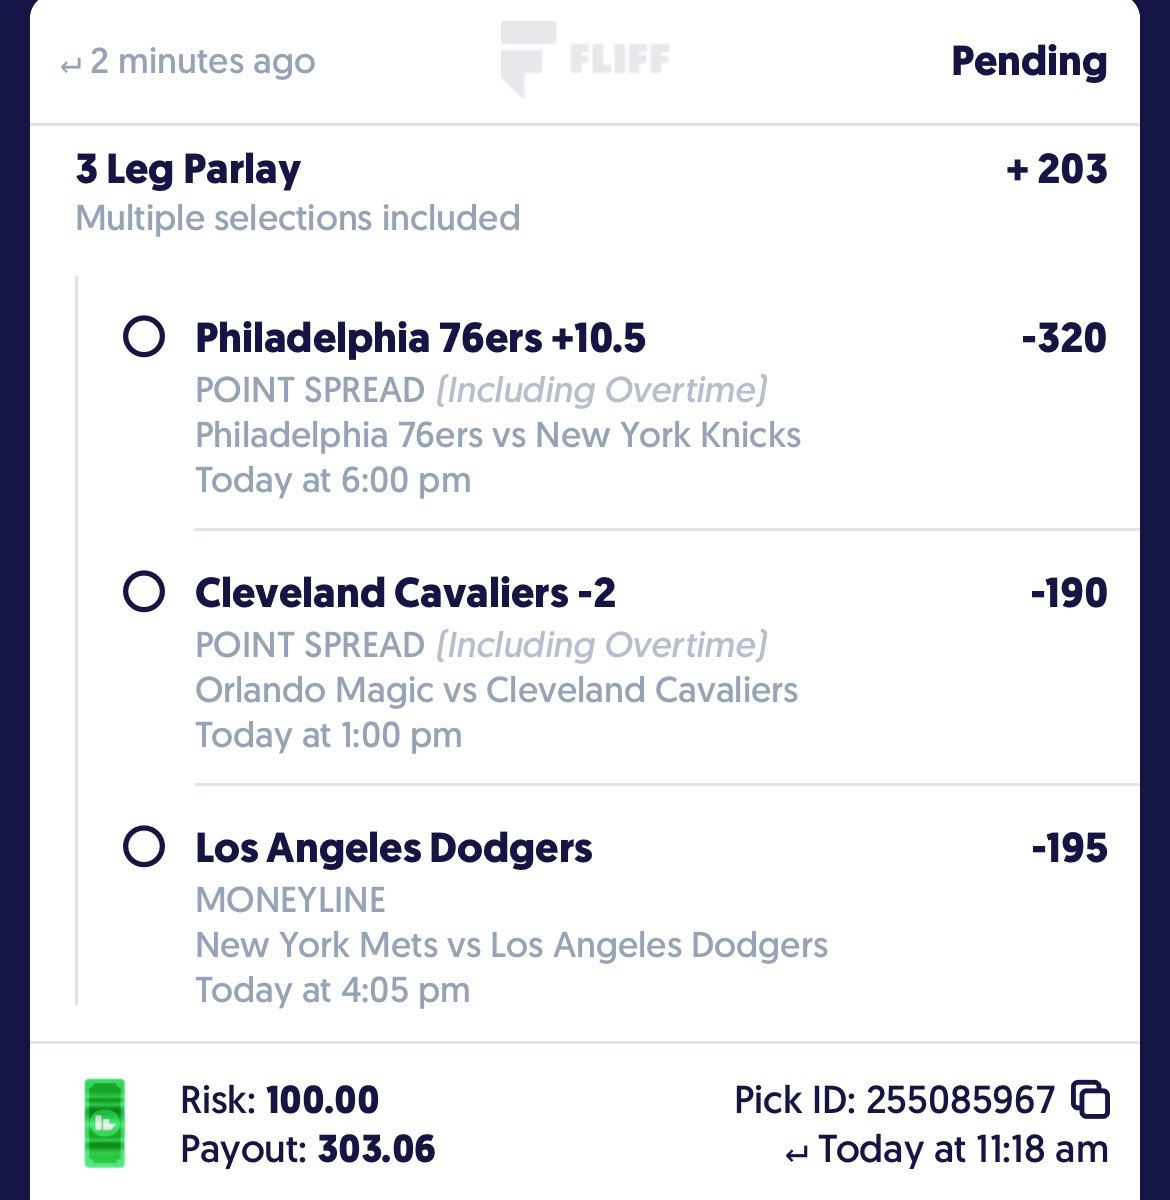 If this cash, I will cashapp one person who likes this $20. 

Saturday has been my money day.

#BettingX #GamblingX #Fliff